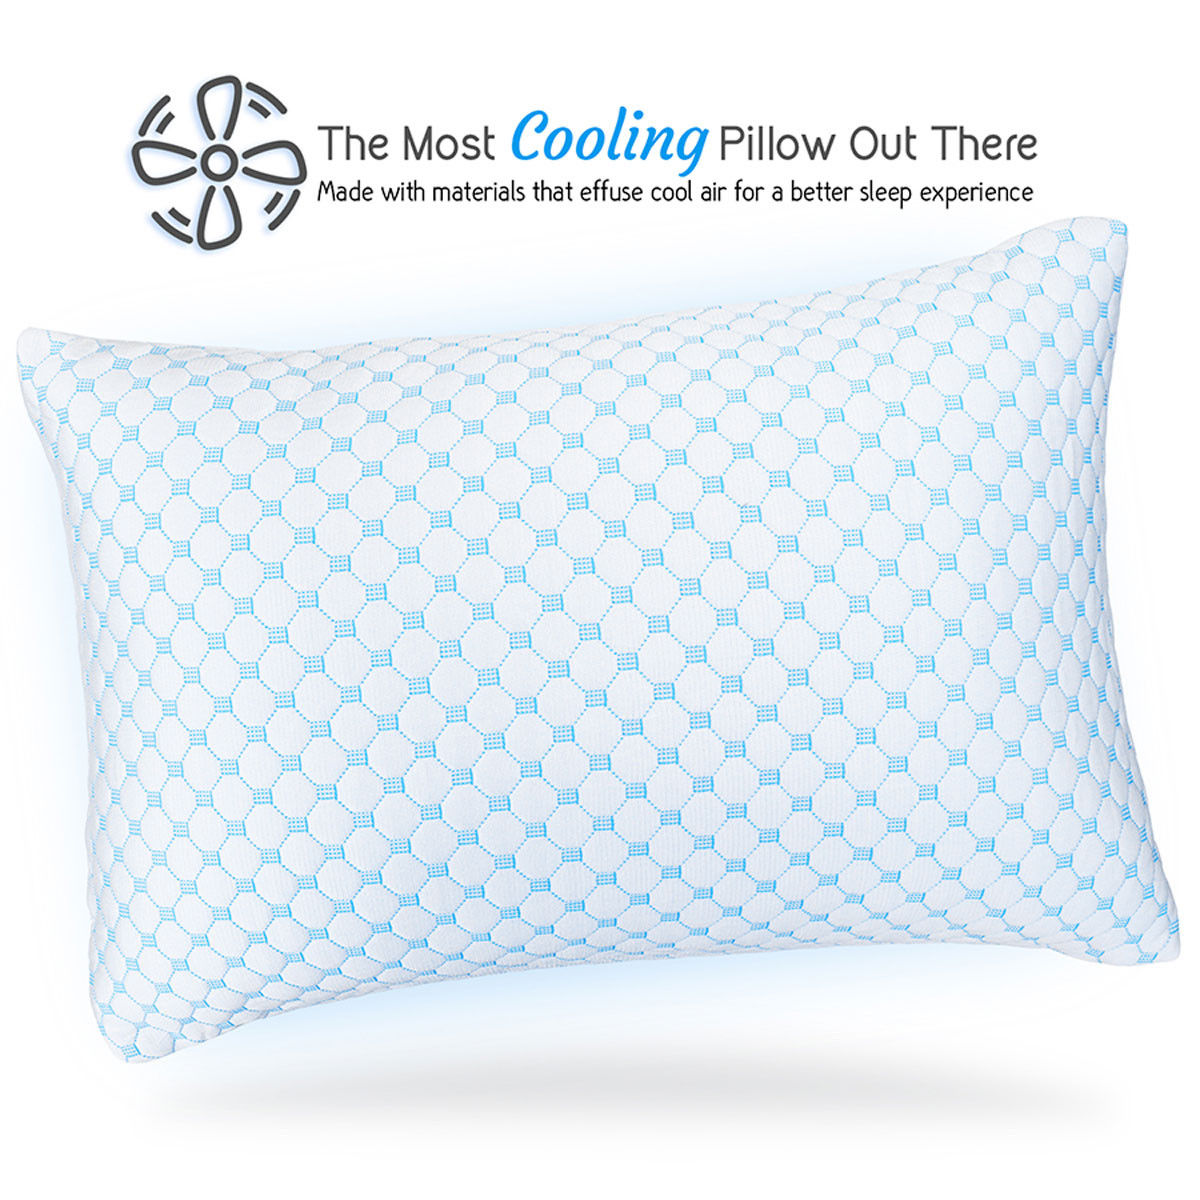 What features does the Clara Clark Reversible Cooling pillow have for its double-sided design?